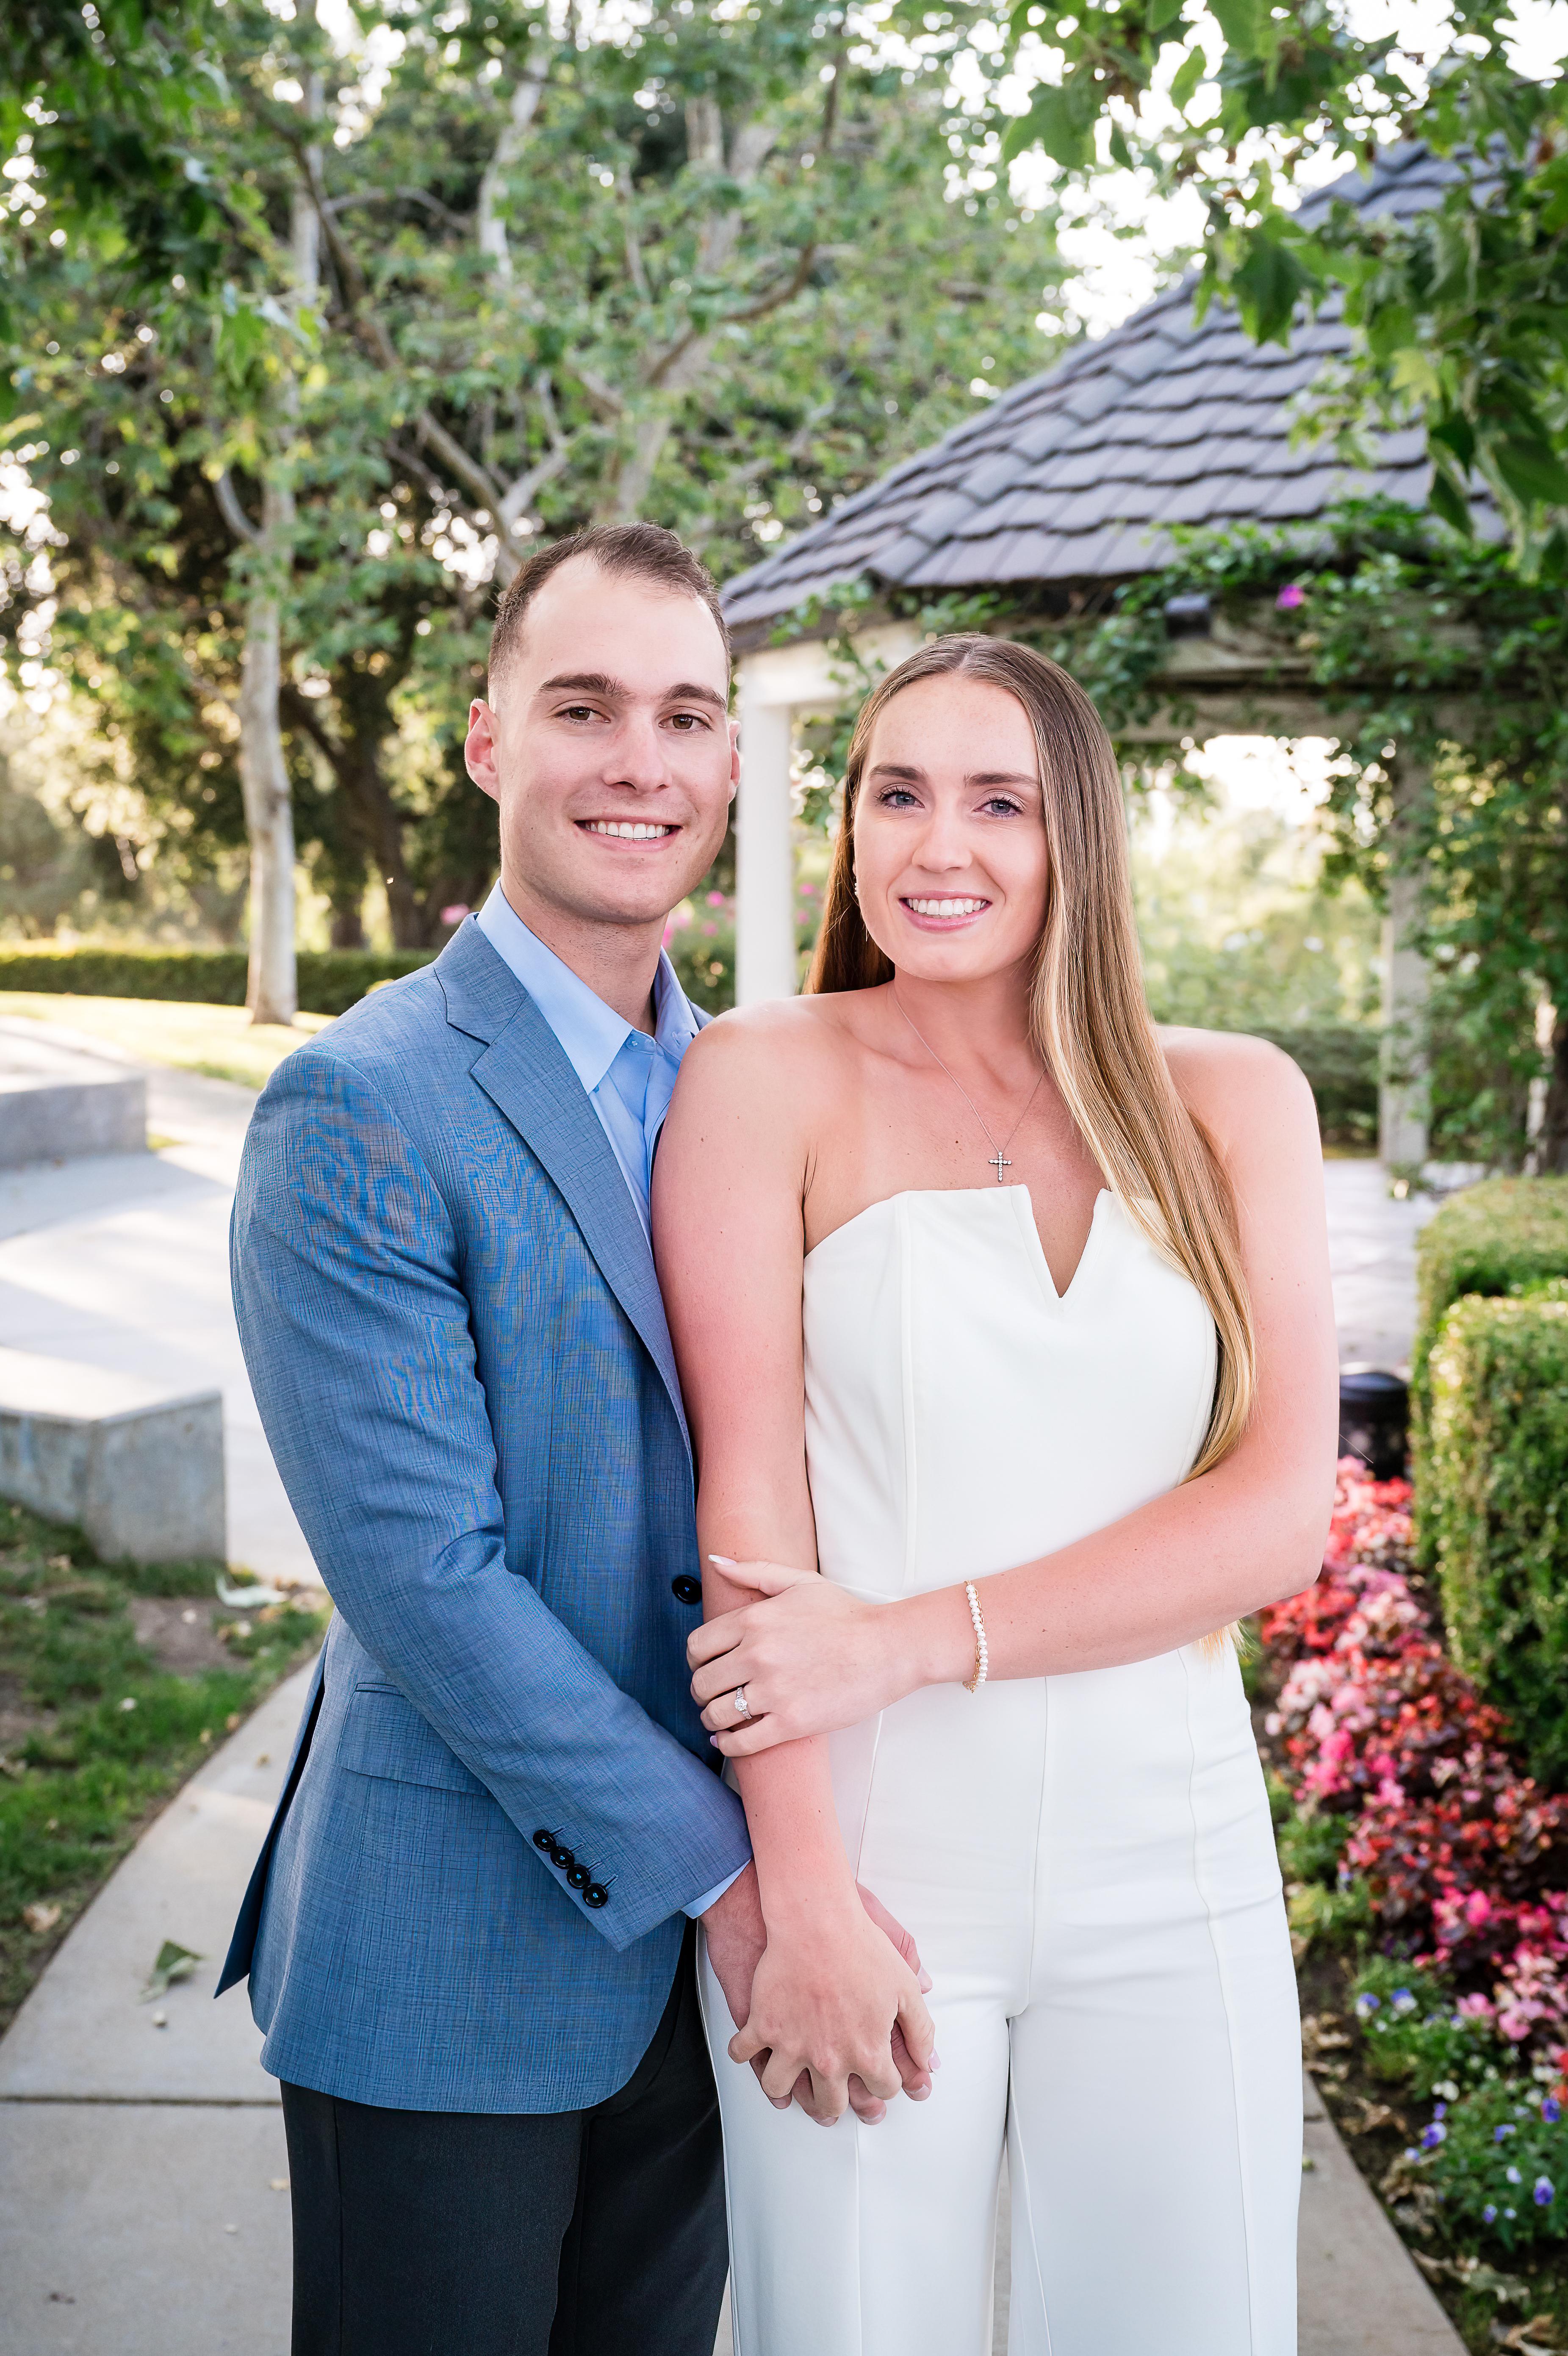 The Wedding Website of Nicole Siess and Brian Papazian